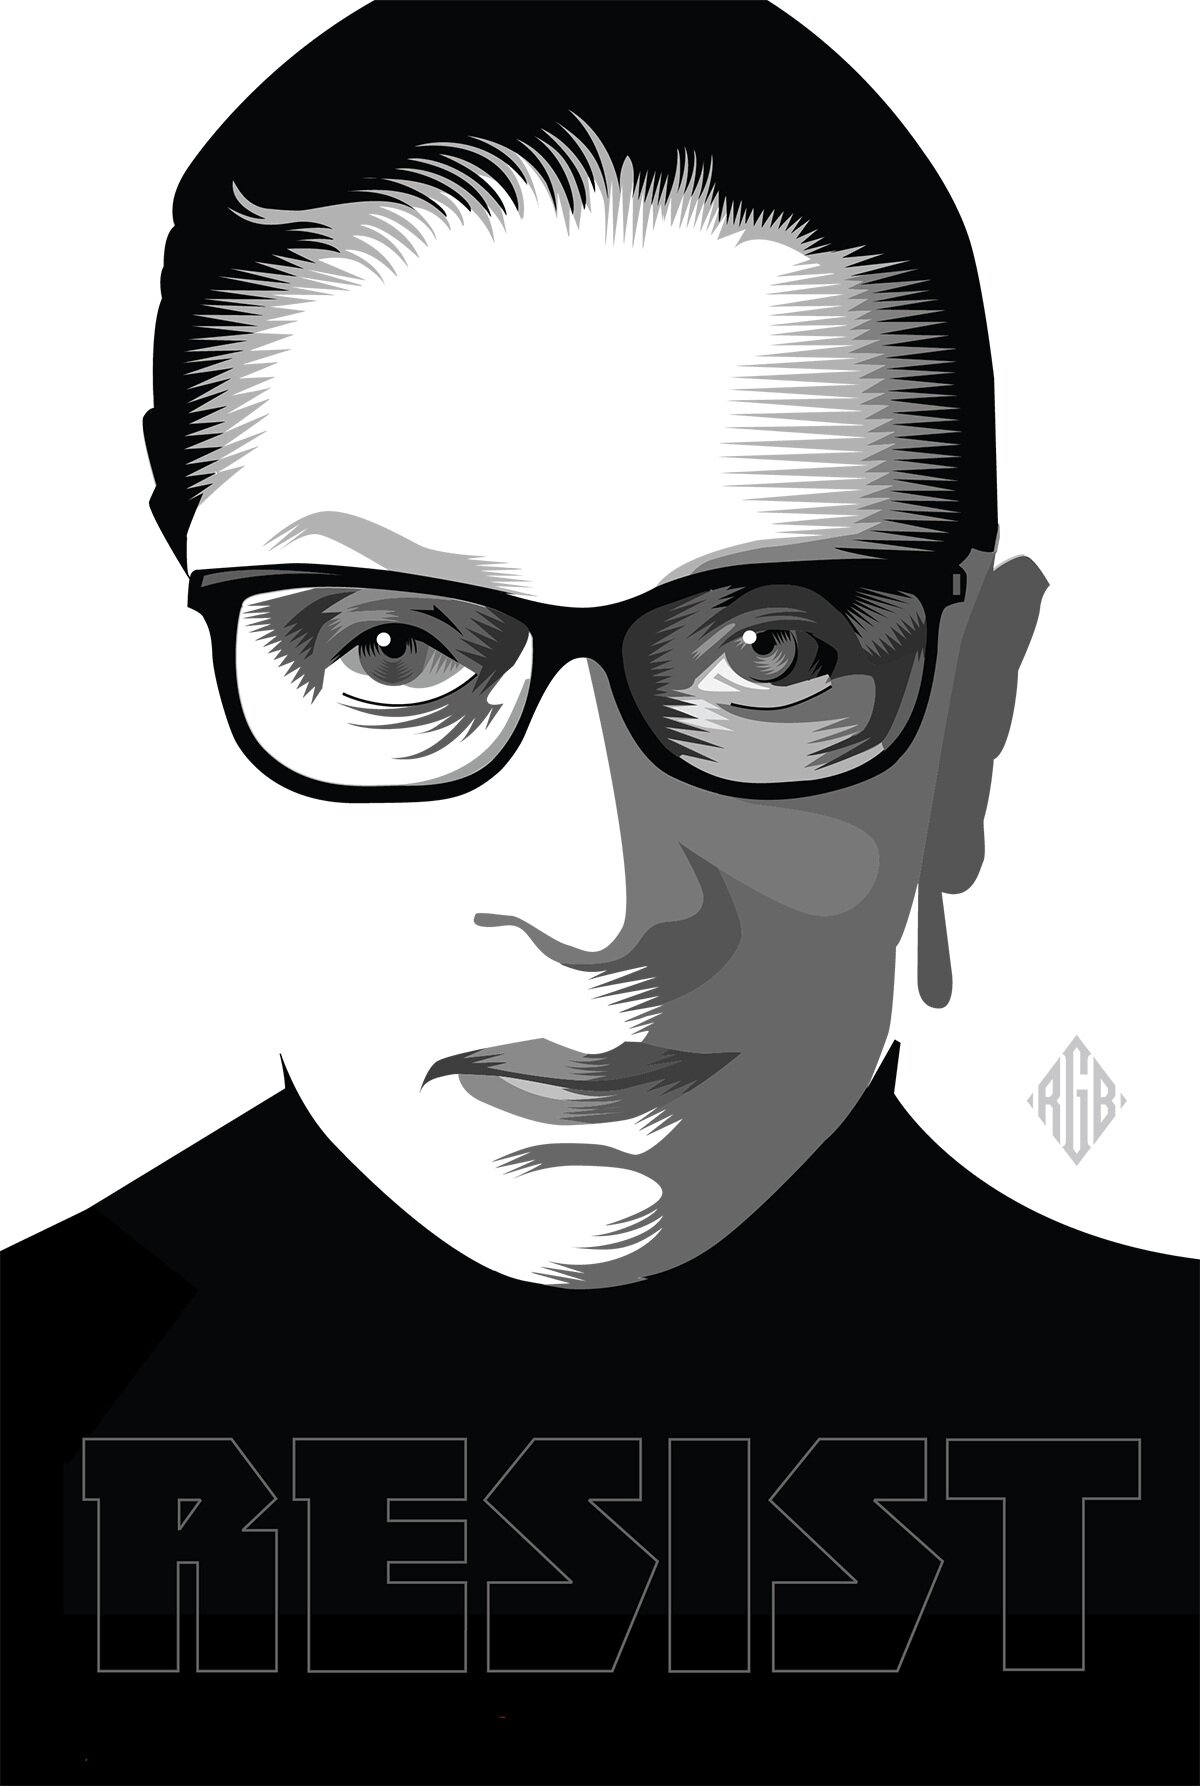 Ruthless: In Memoriam Ruth Bader Ginsburg  3.15.1933-9.18.2020